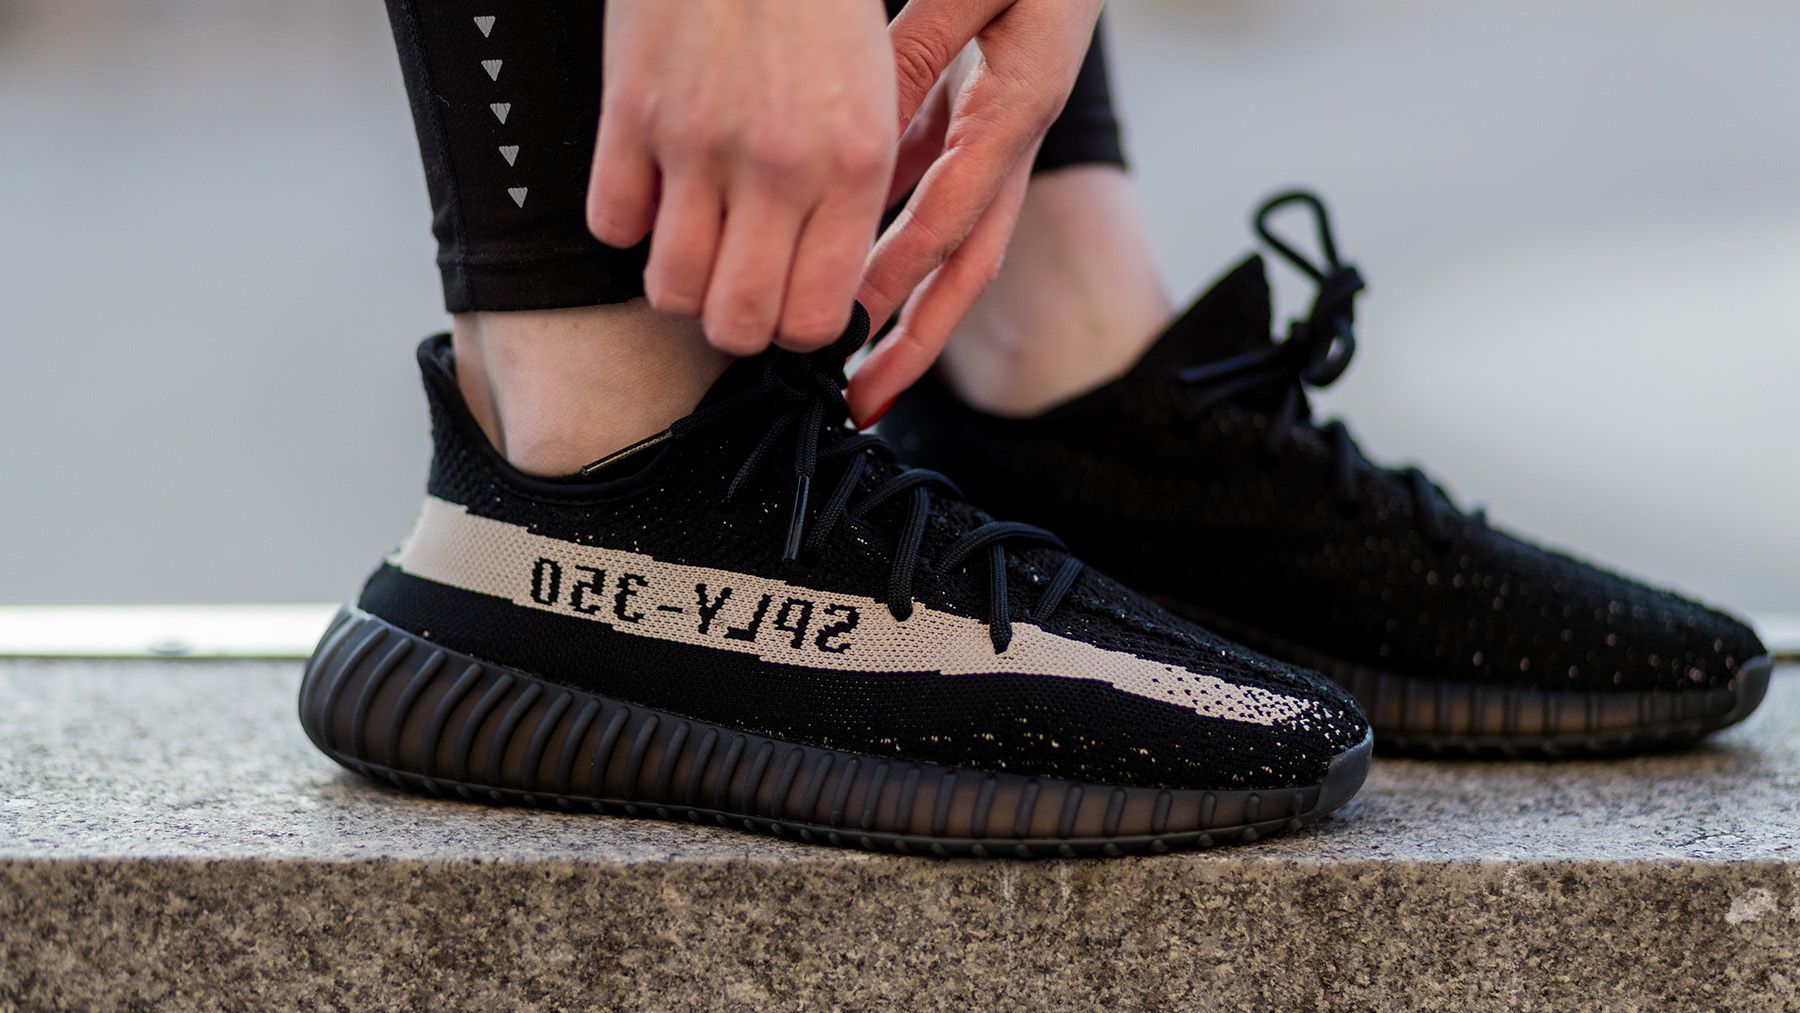 Adidas Improves Earnings Guidance After Selling Some Yeezy Shoes